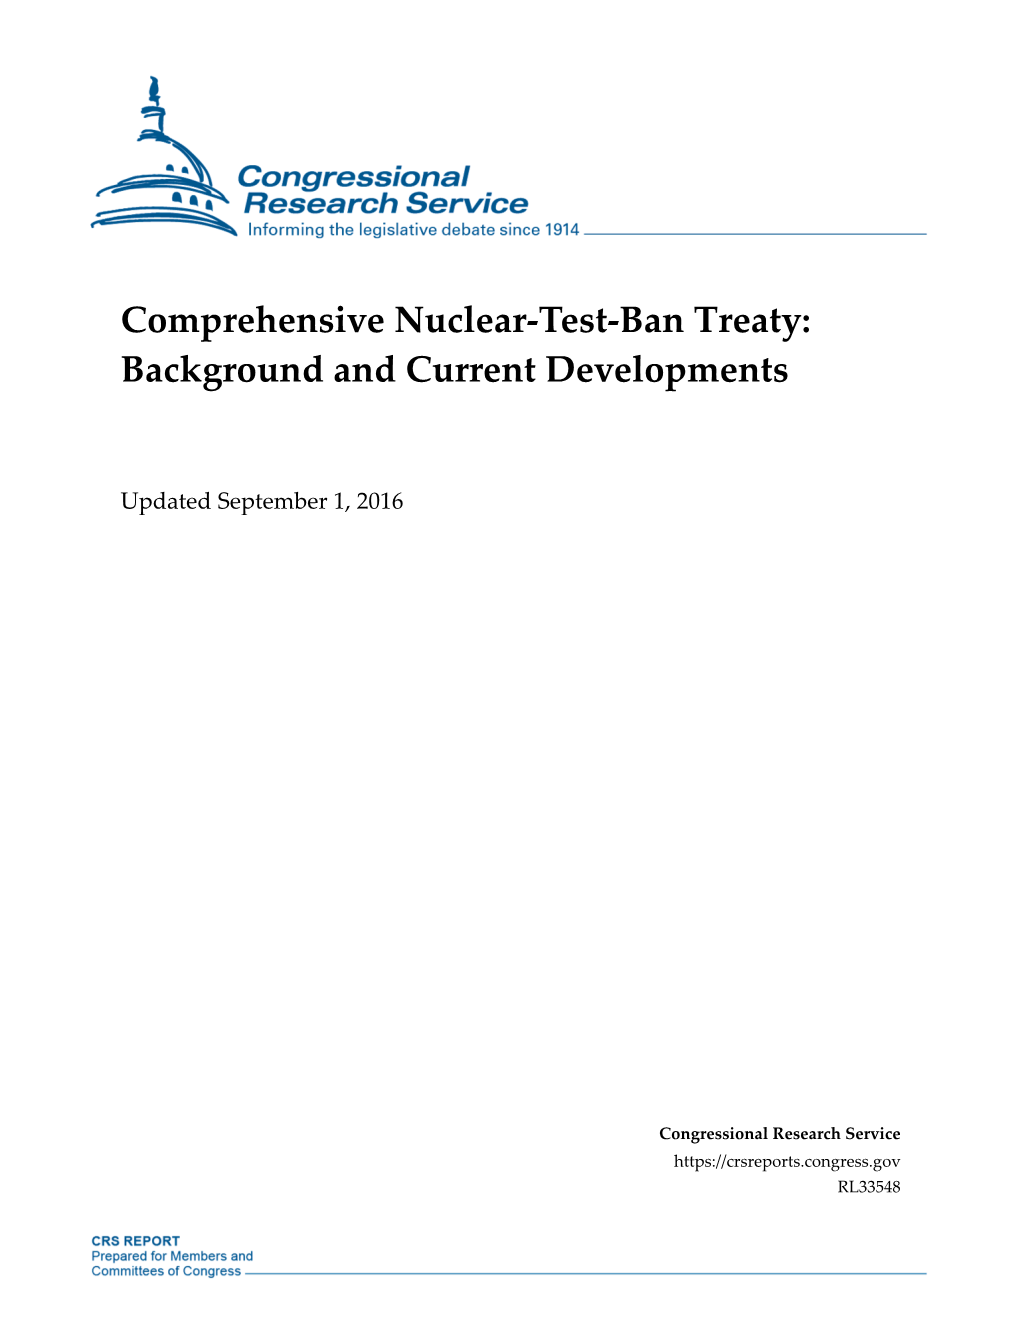 Comprehensive Nuclear-Test-Ban Treaty: Background and Current Developments